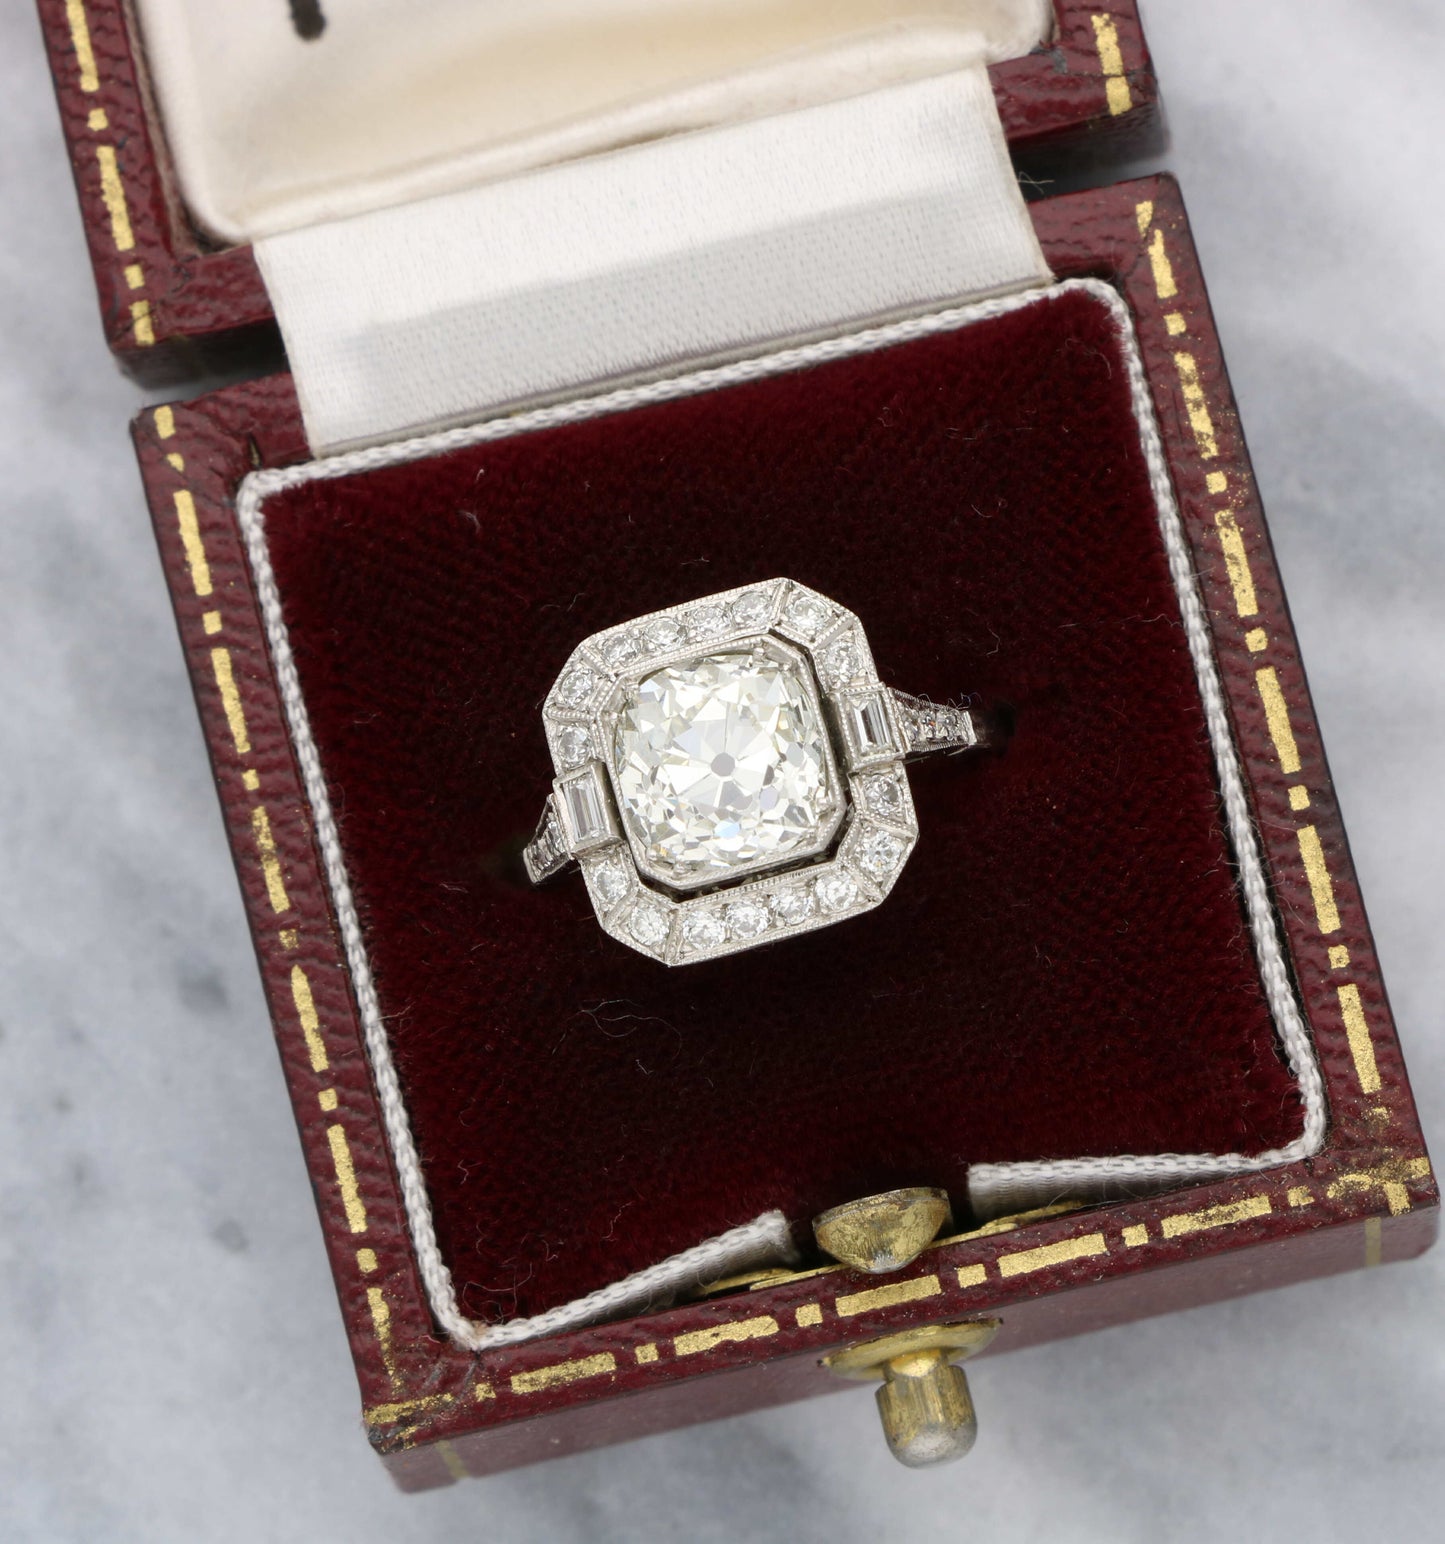 2.26ct old cut diamond Art Deco style engagement ring